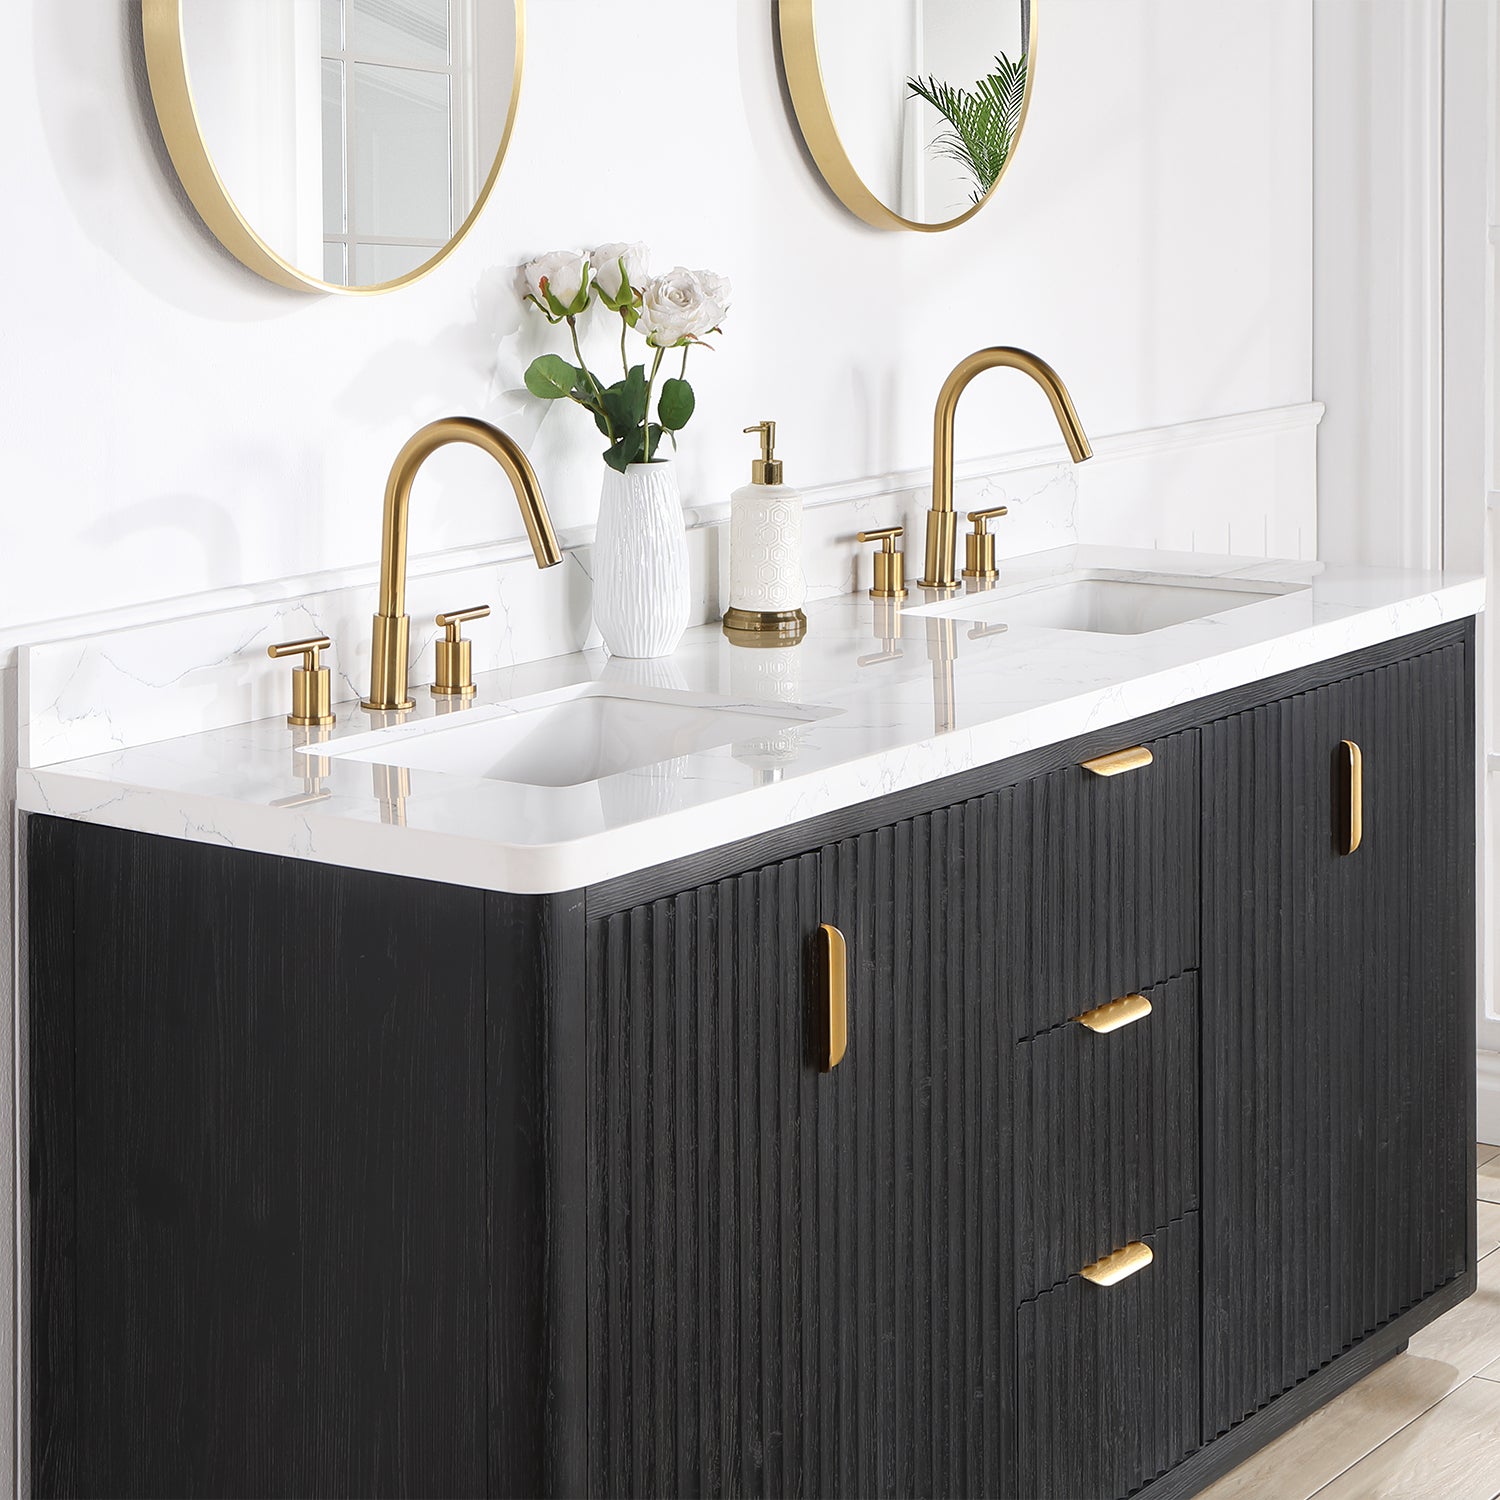 Cádiz 72in. Free-standing Double Bathroom Vanity in Fir Wood Black with Composite top in Lightning White